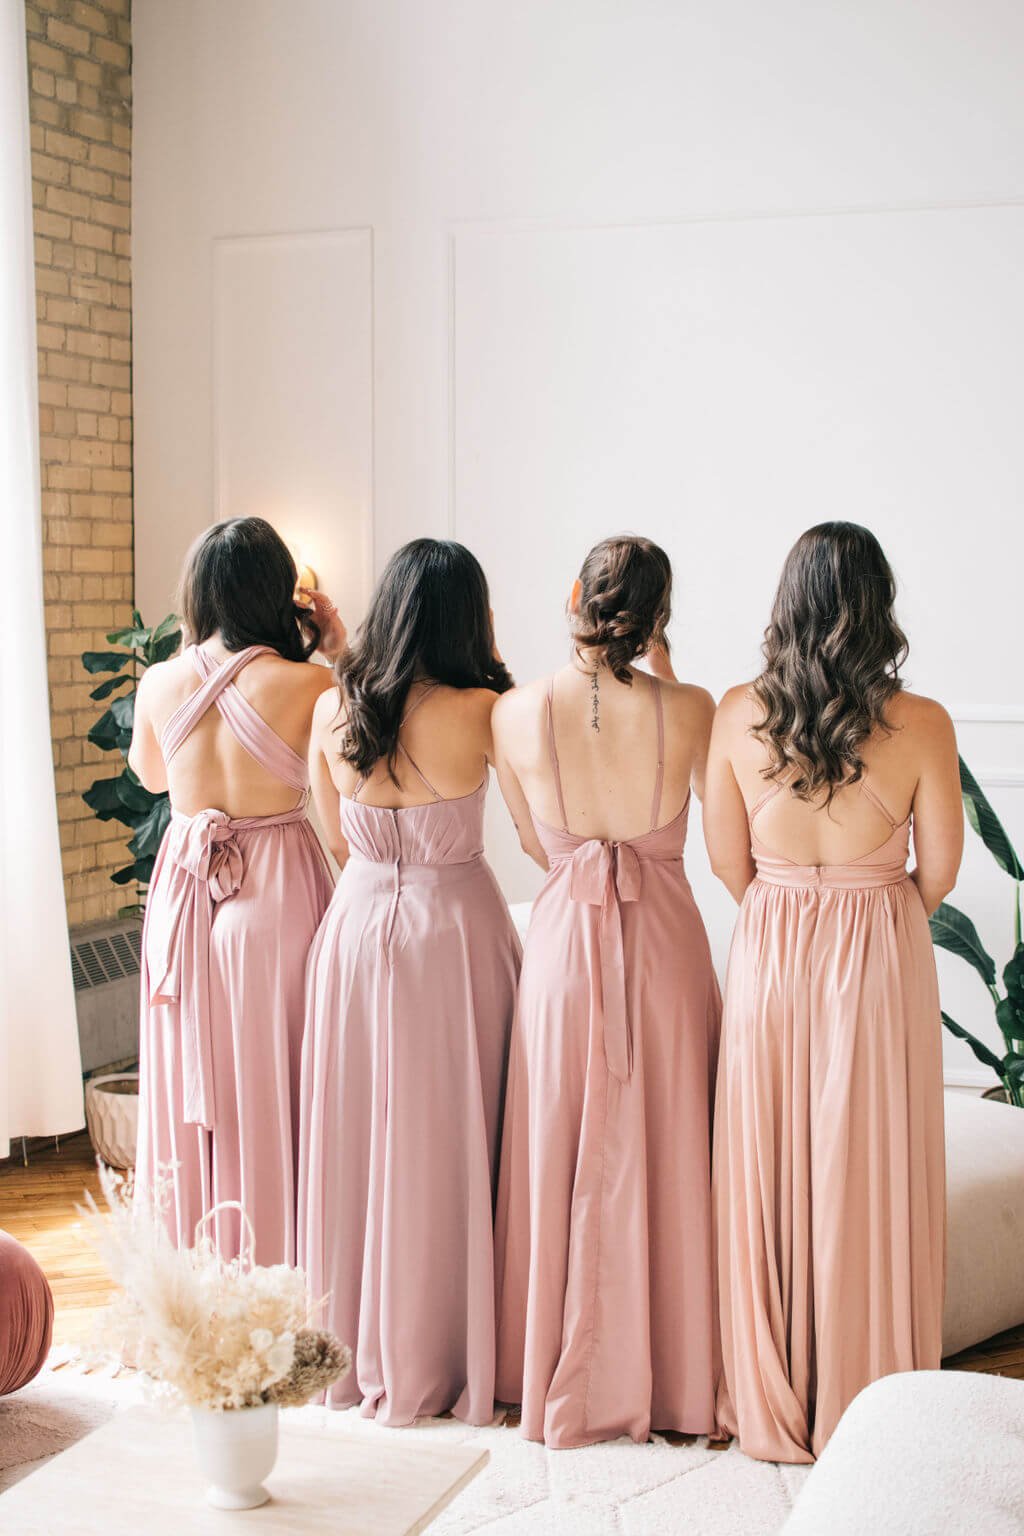 Timeless Toronto wedding day first look photographed by Toronto wedding photographers, Ugo Photography